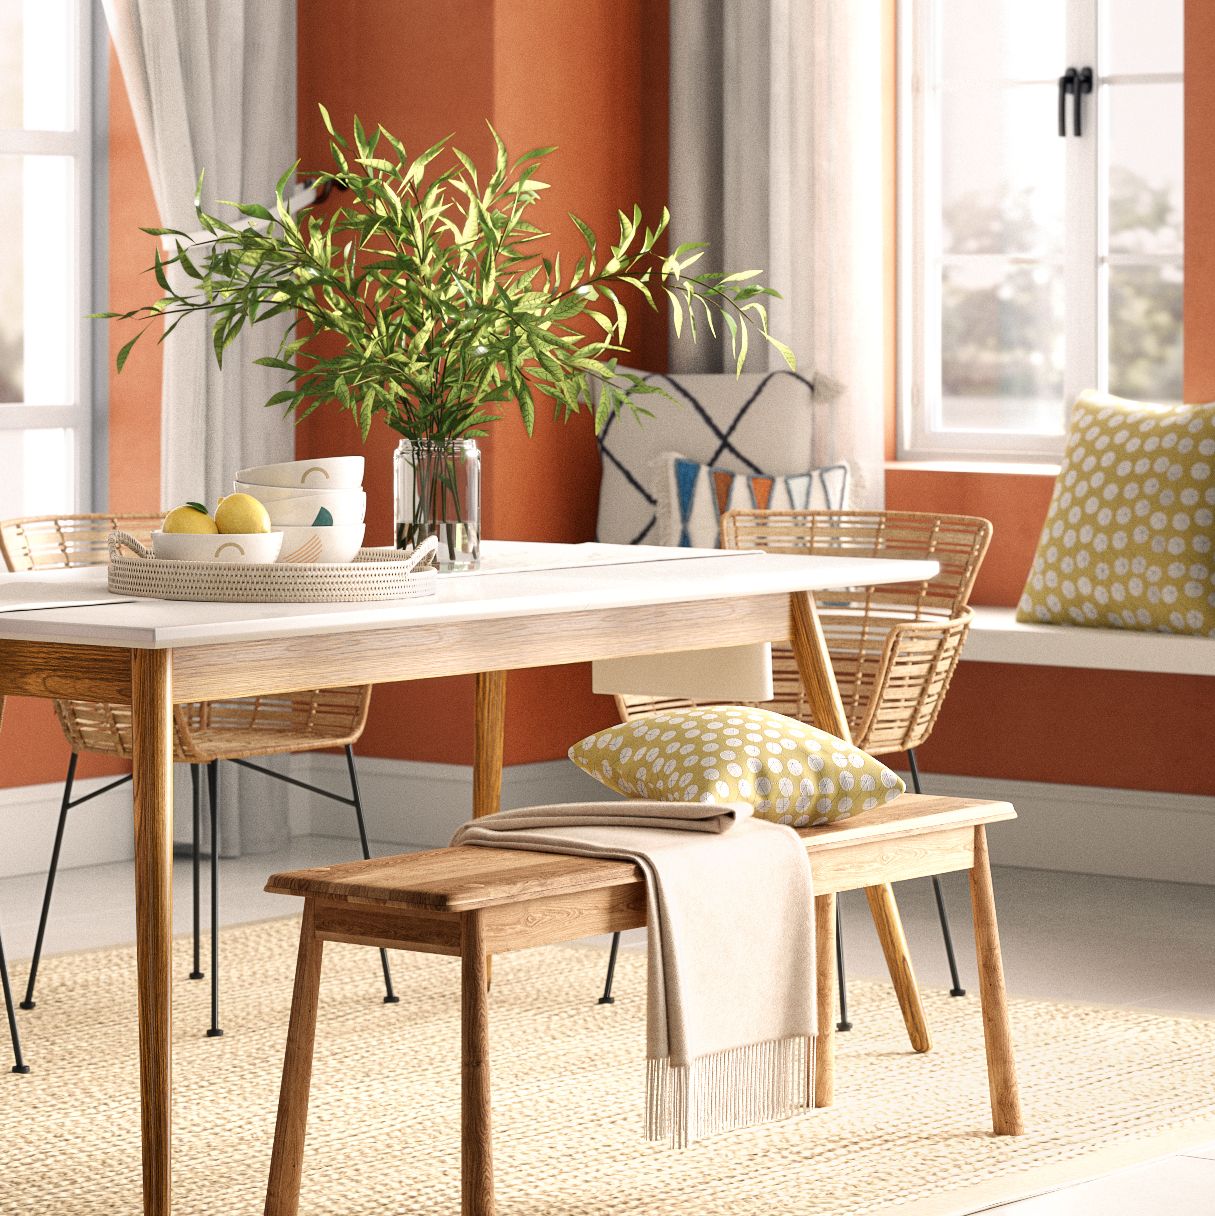 dining room with orange walls, wooden furniture and a nature inspired theme